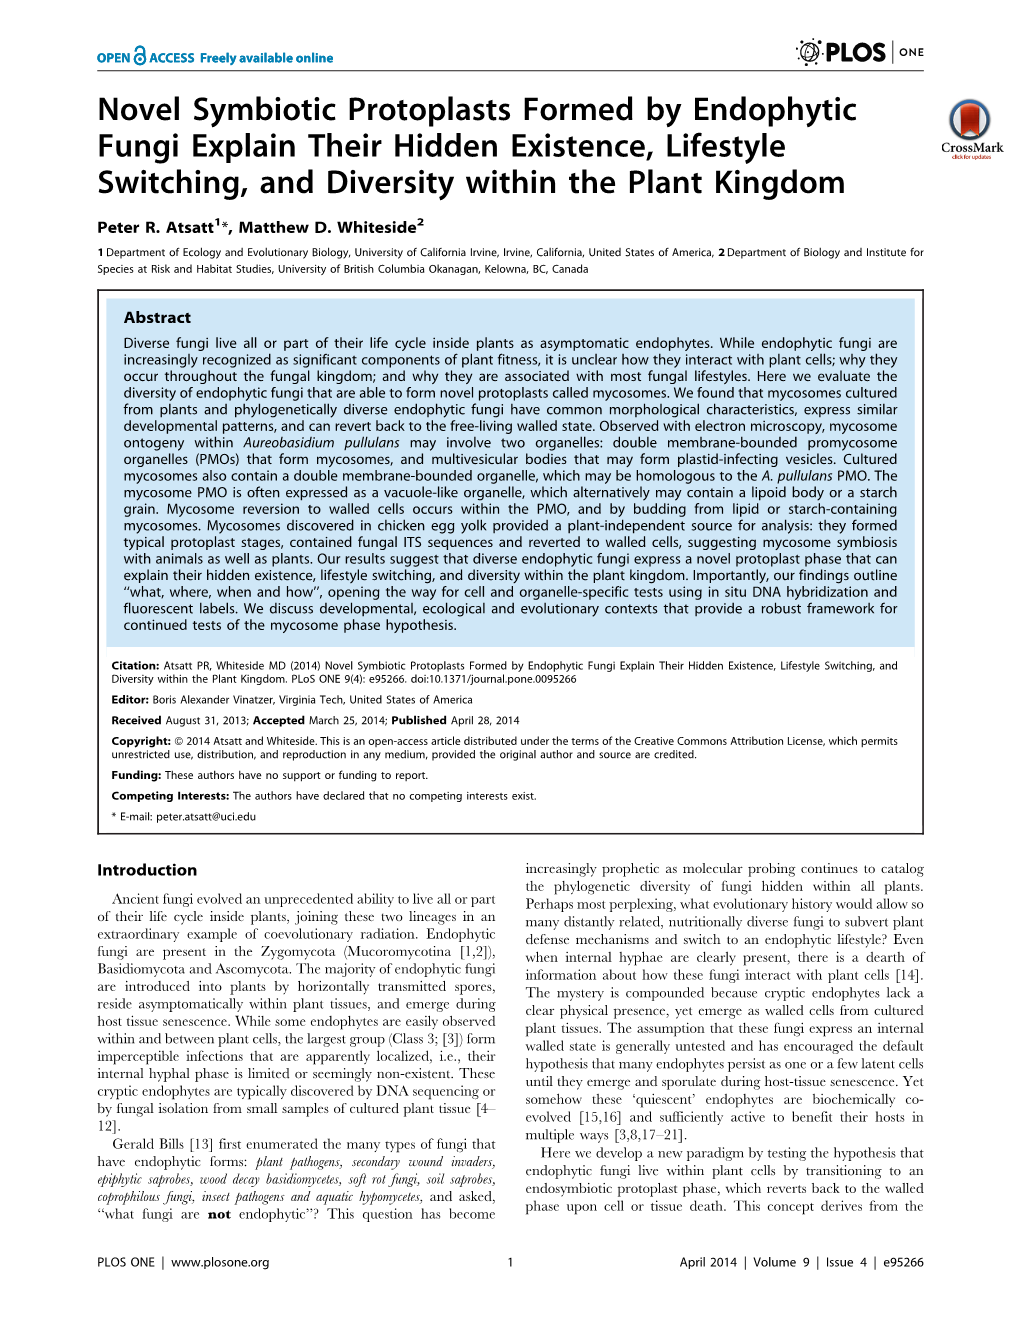 Novel Symbiotic Protoplasts Formed by Endophytic Fungi Explain Their Hidden Existence, Lifestyle Switching, and Diversity Within the Plant Kingdom